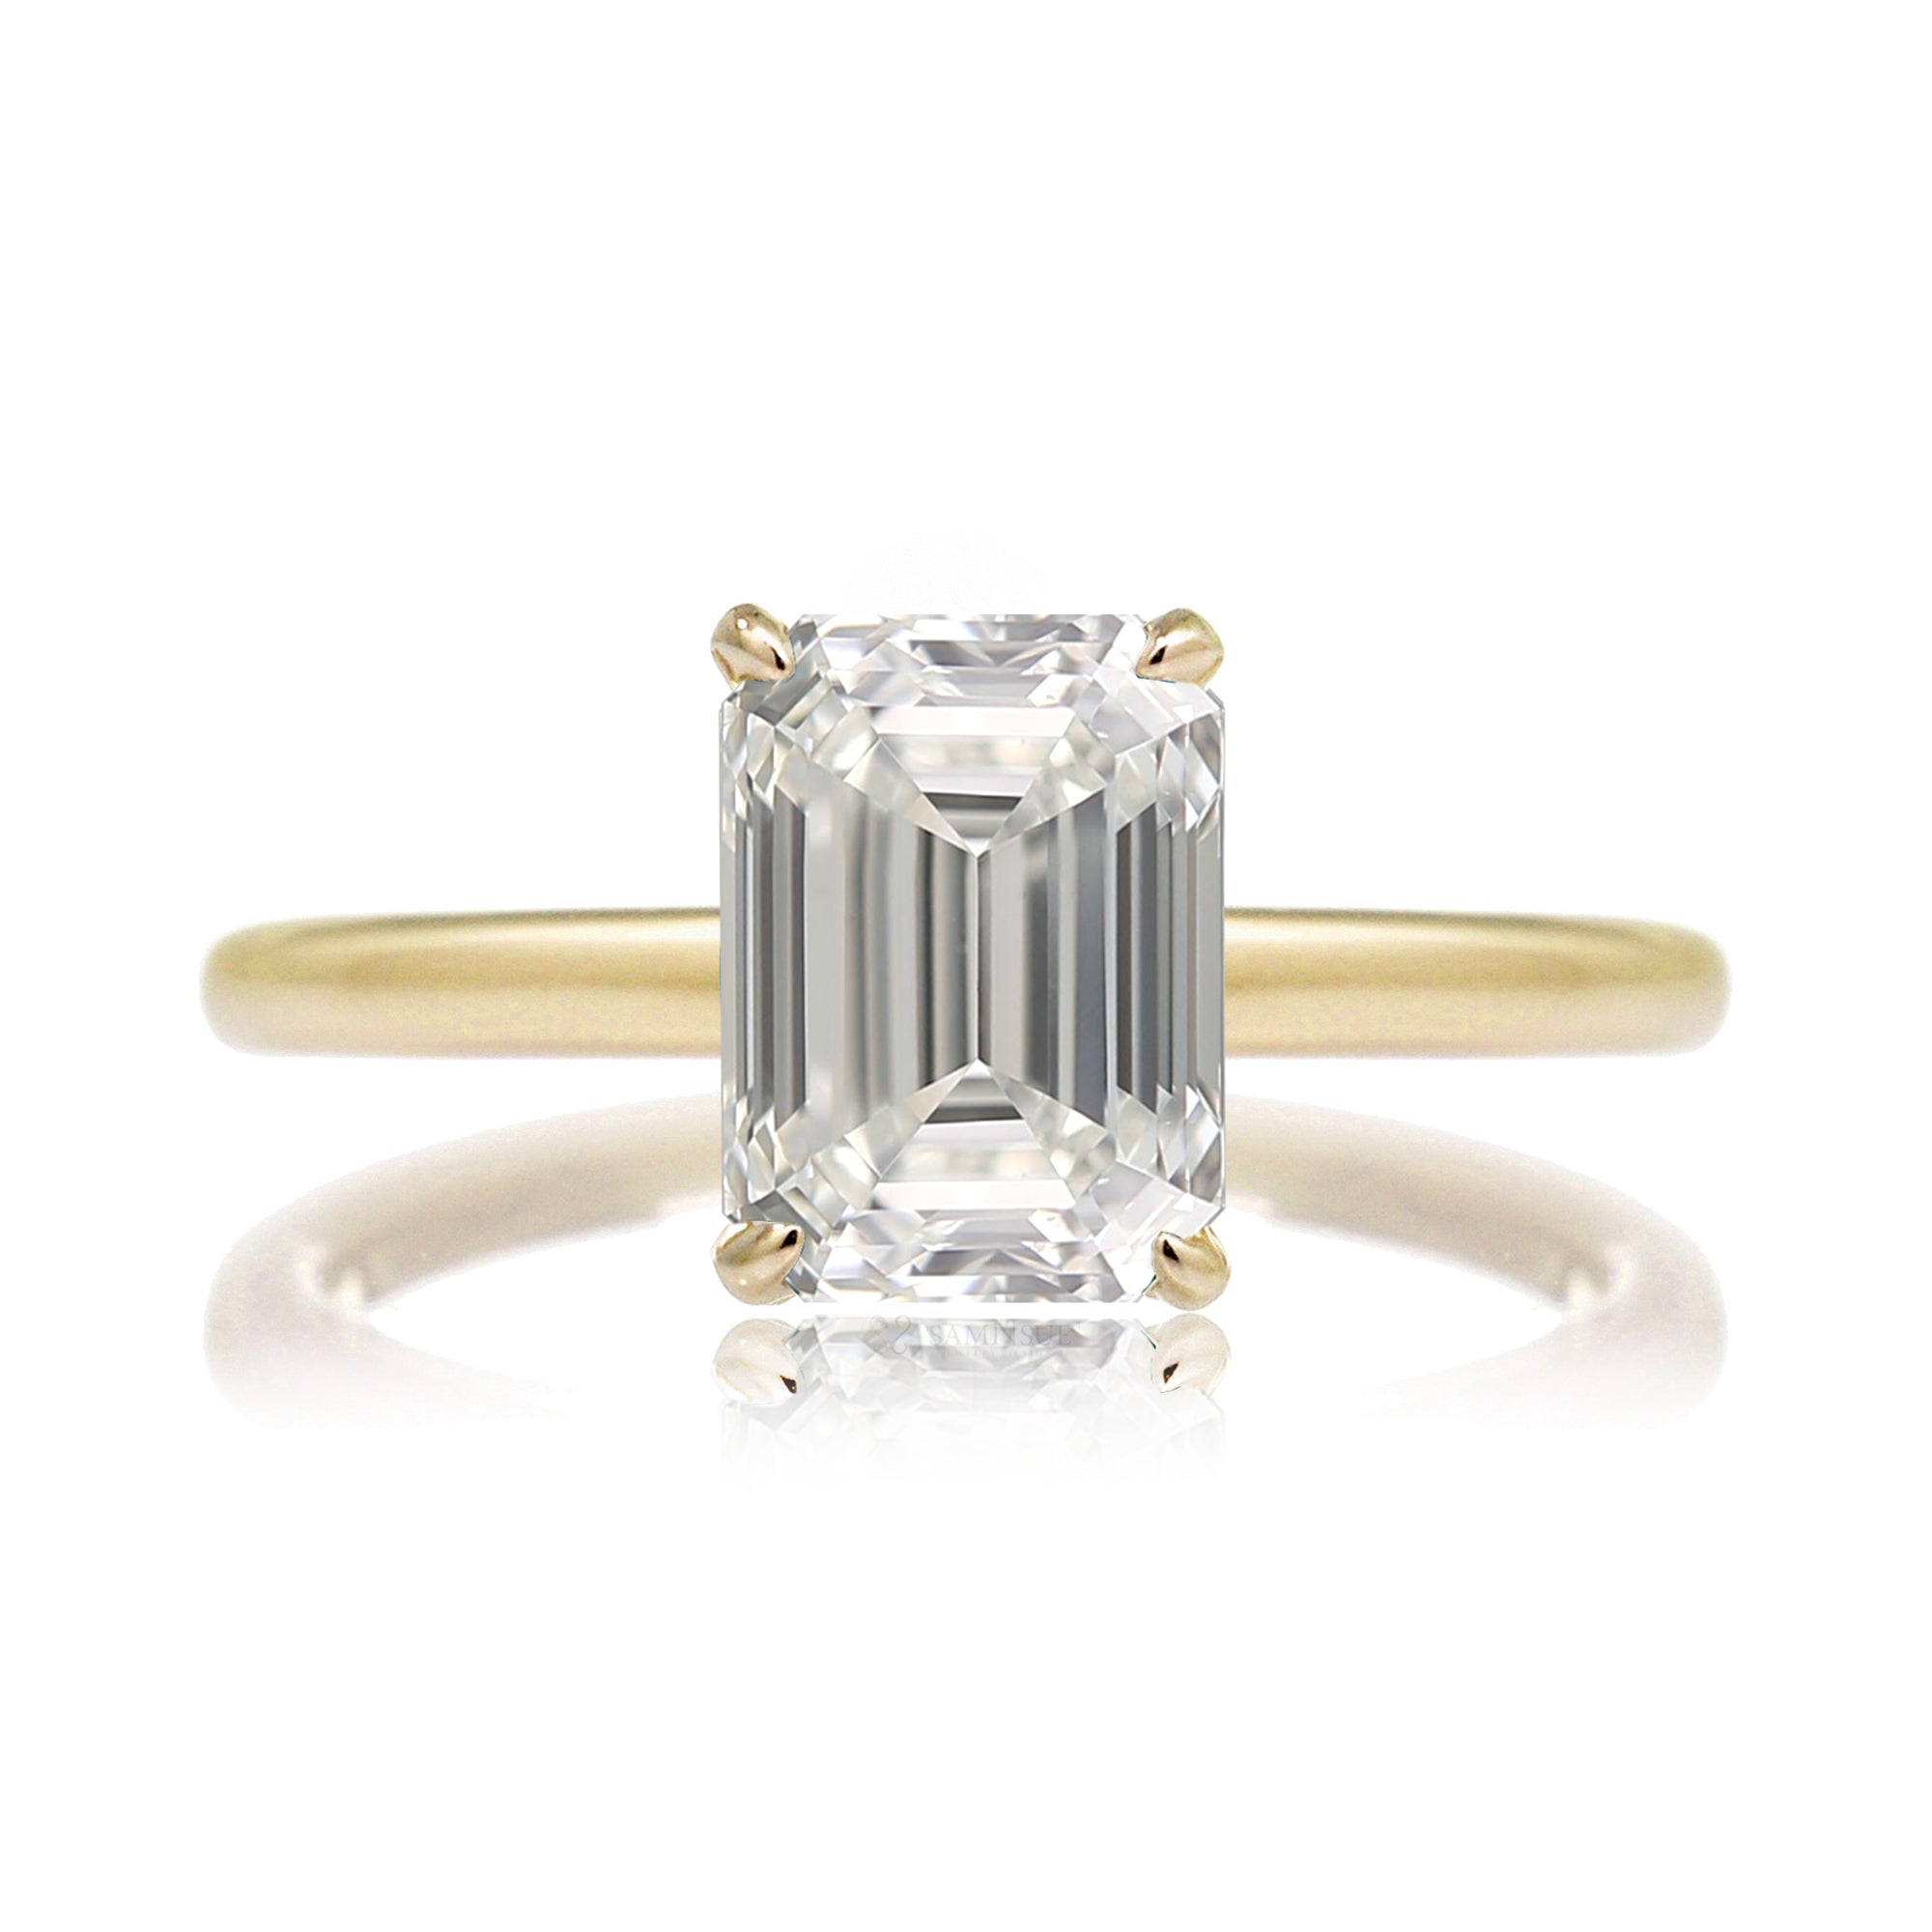 Emerald Step cut solitaire engagement ring diamond hidden halo solid band in yellow gold